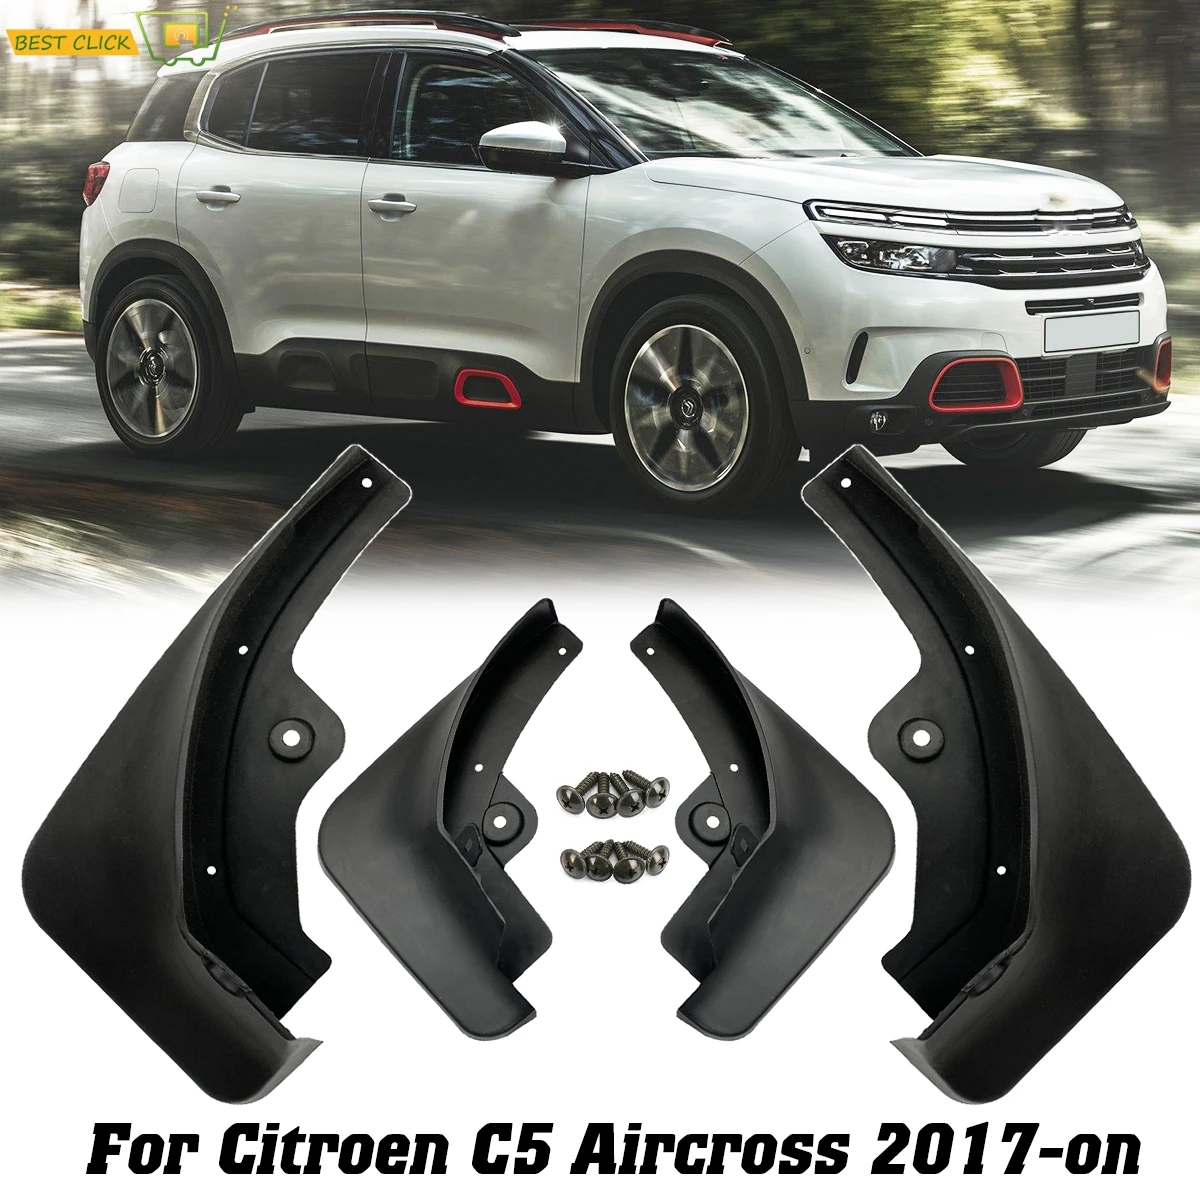 Front Rear Mud Flaps For Citroen C5 Aircross 2017 2018 2019 2020 Mudflaps Splash Guards Flap Mudguards OE/OEM Number:1636054780